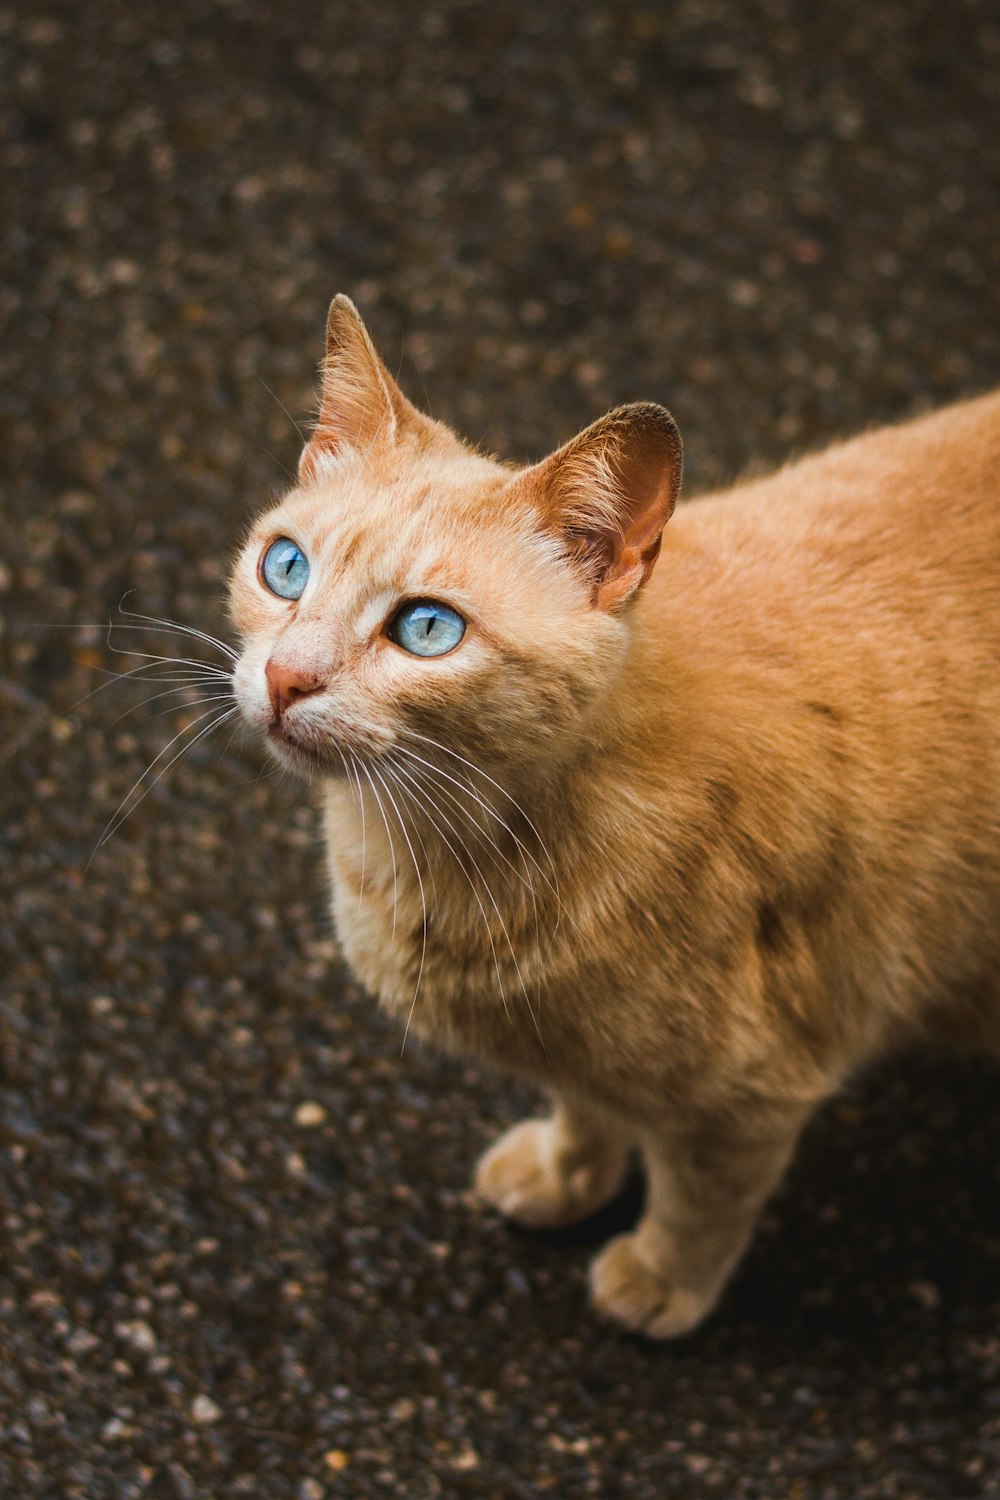 a cat with blue eyes standing on the ground